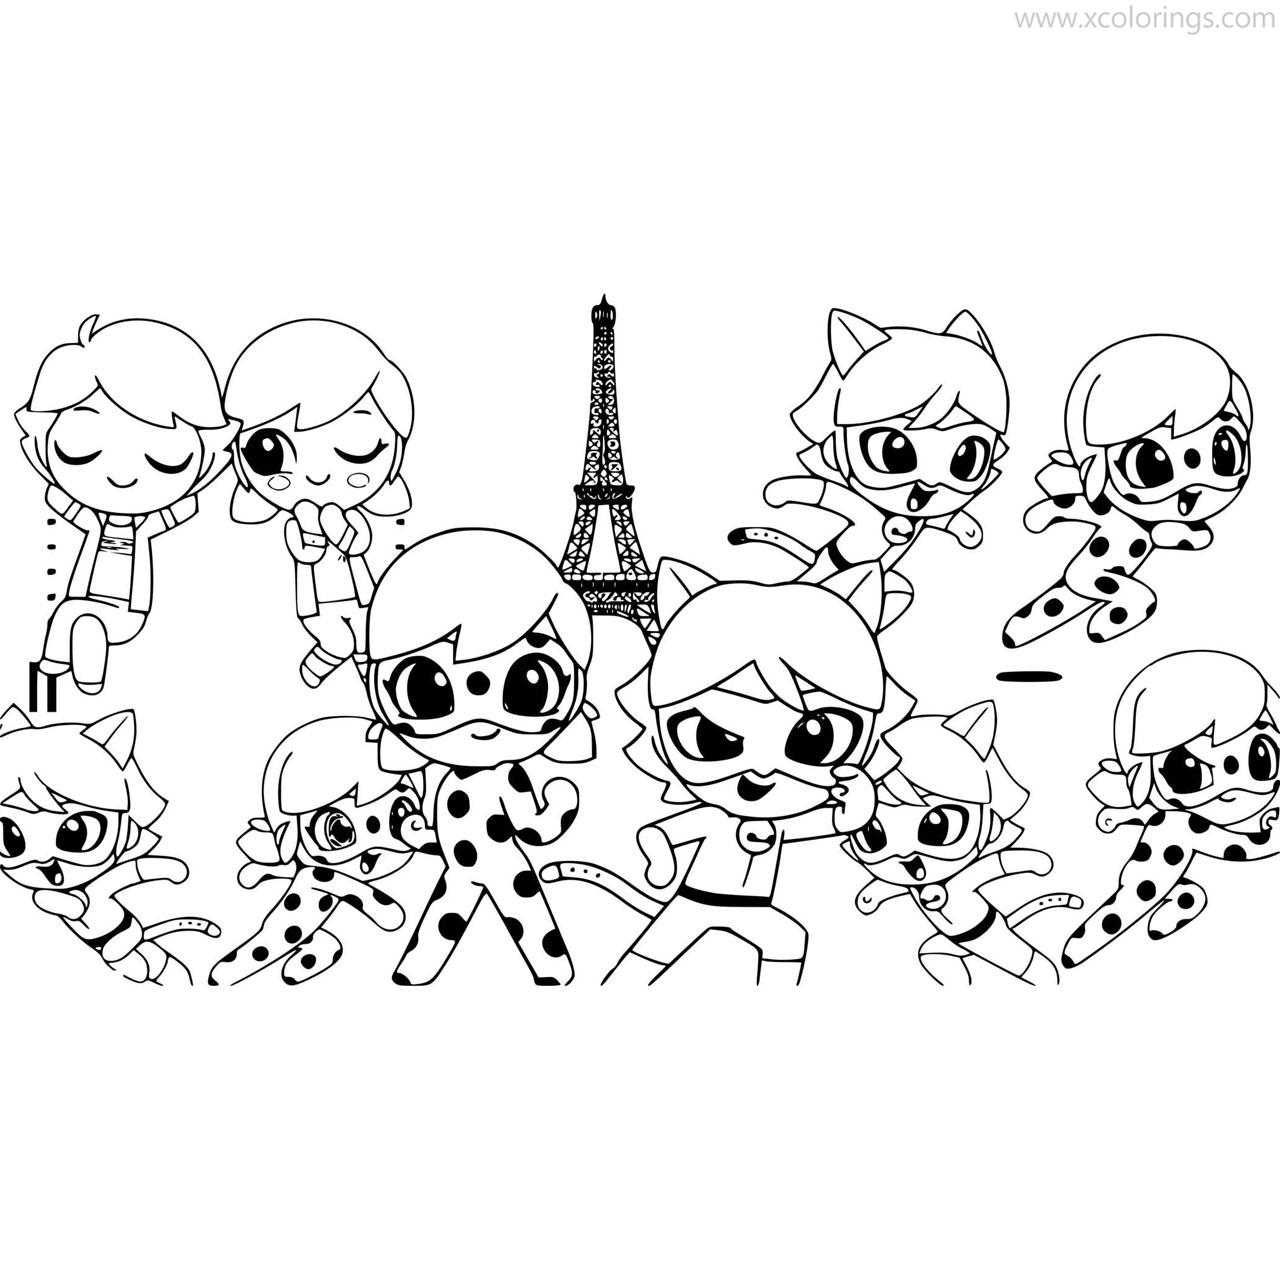 Miraculous Ladybug Coloring Pages Printable